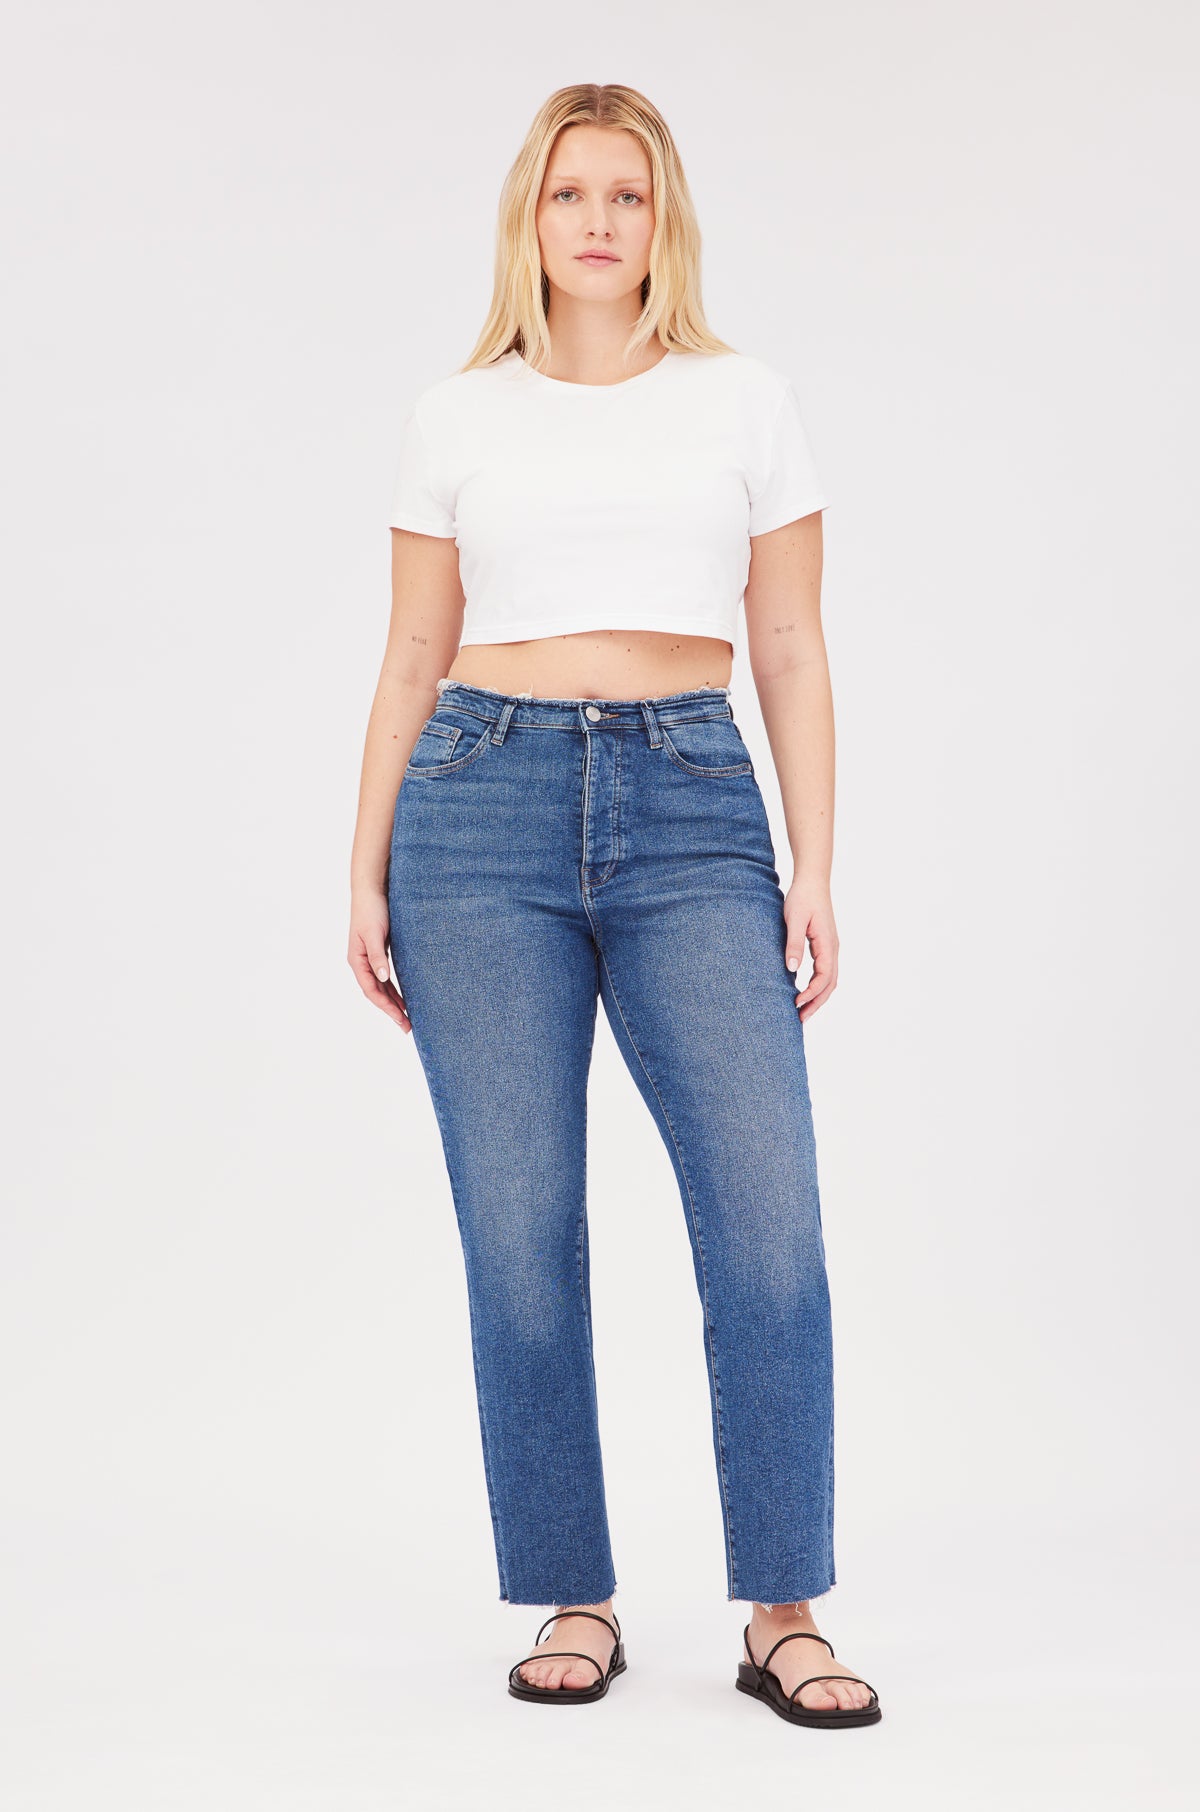 HIGH WAISTED JEANS HAUL & REVIEW